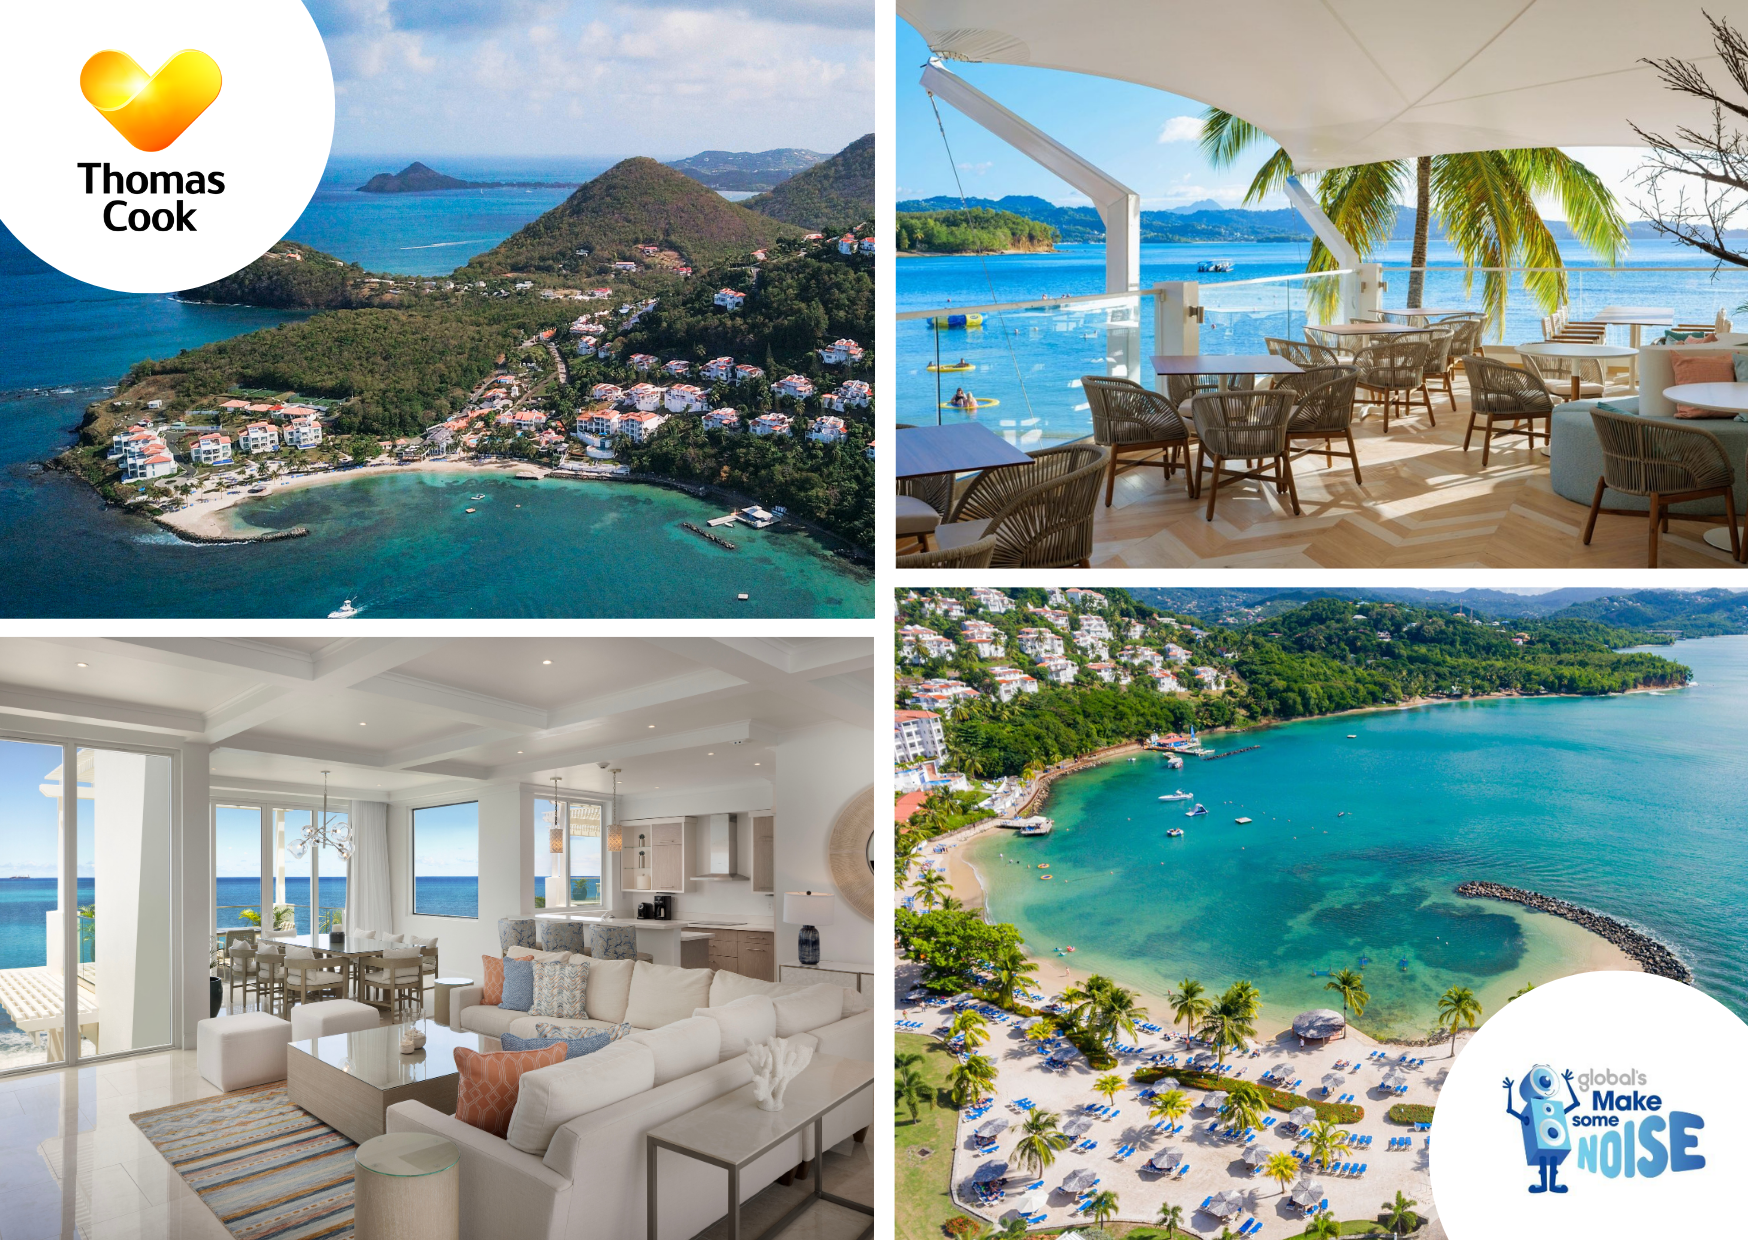 Win an all-inclusive holiday for two to St Lucia!